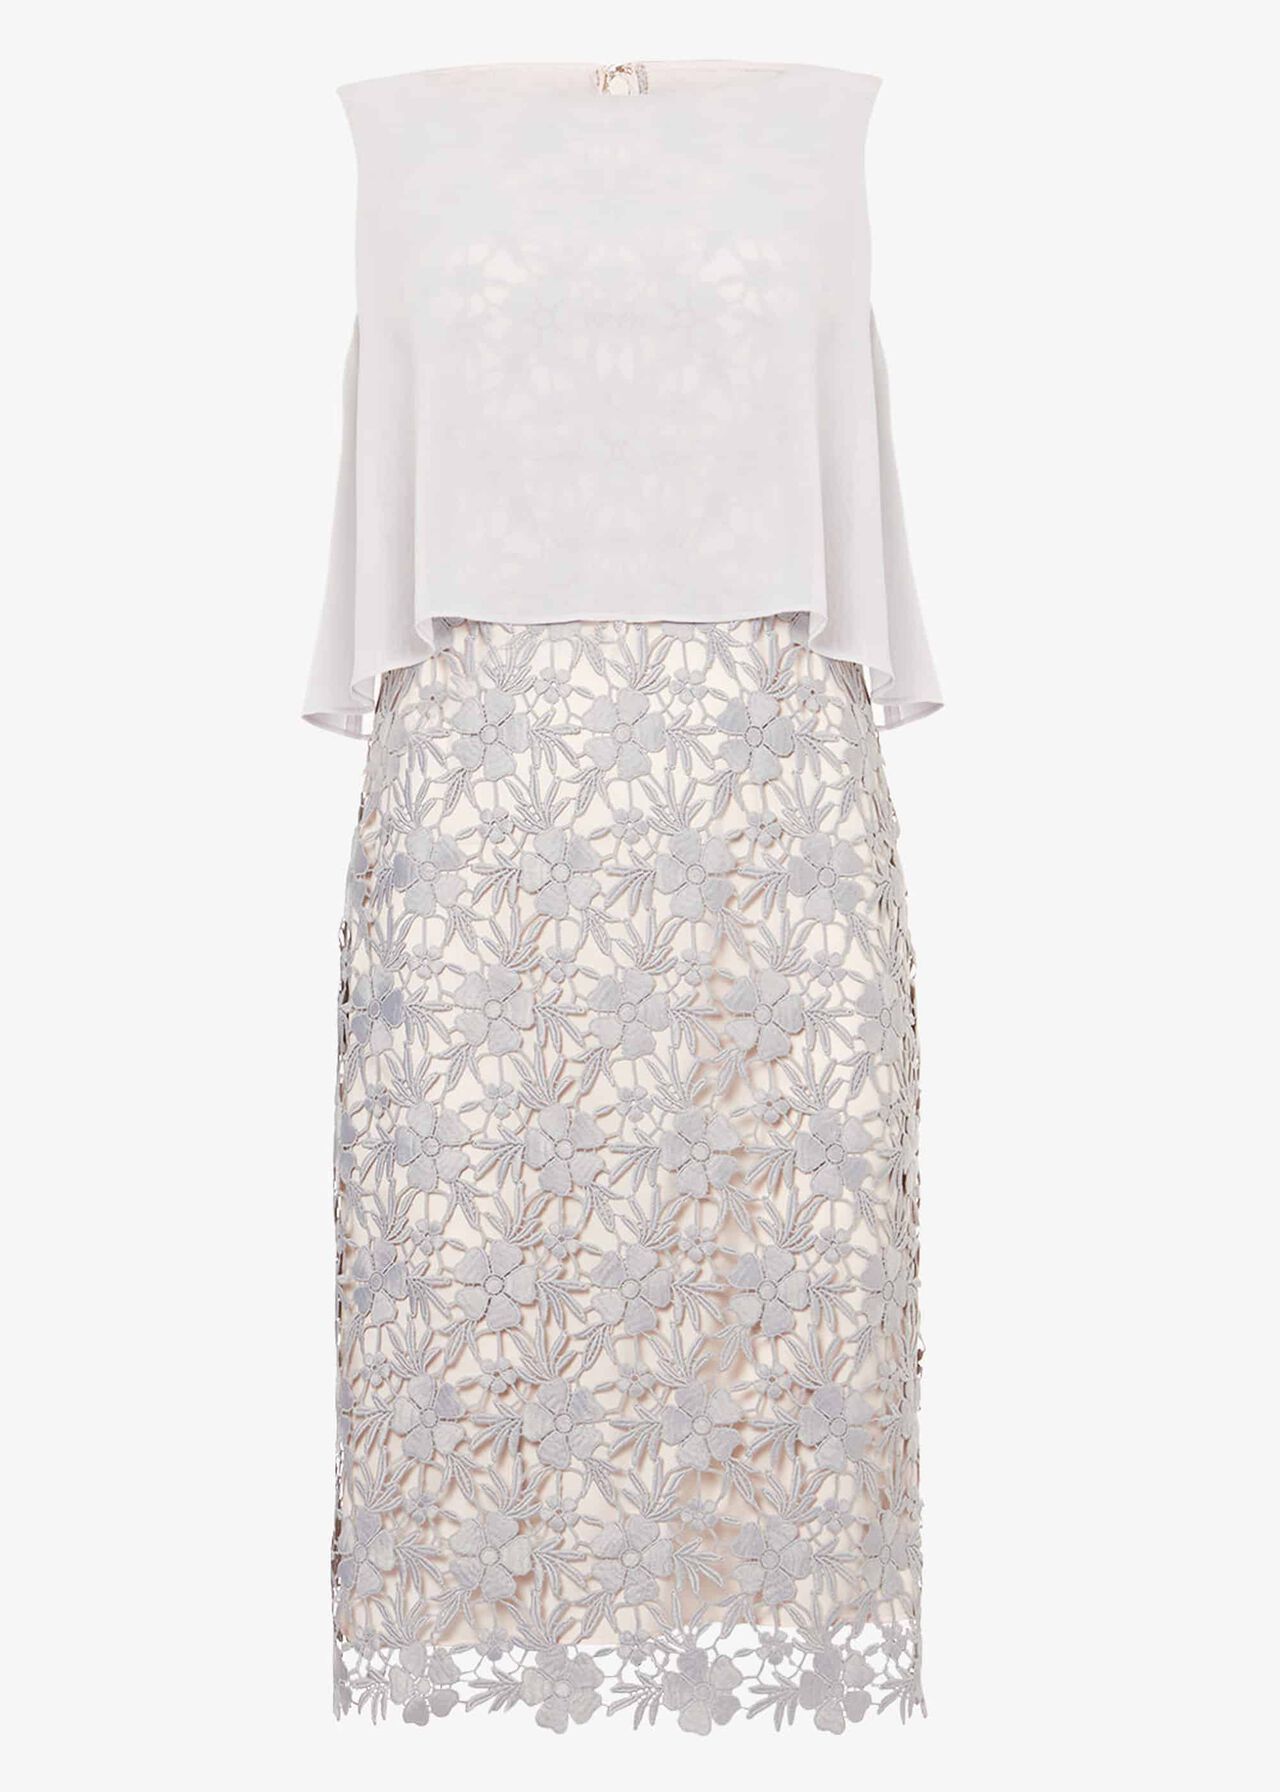 Tuileries Layered Lace Dress